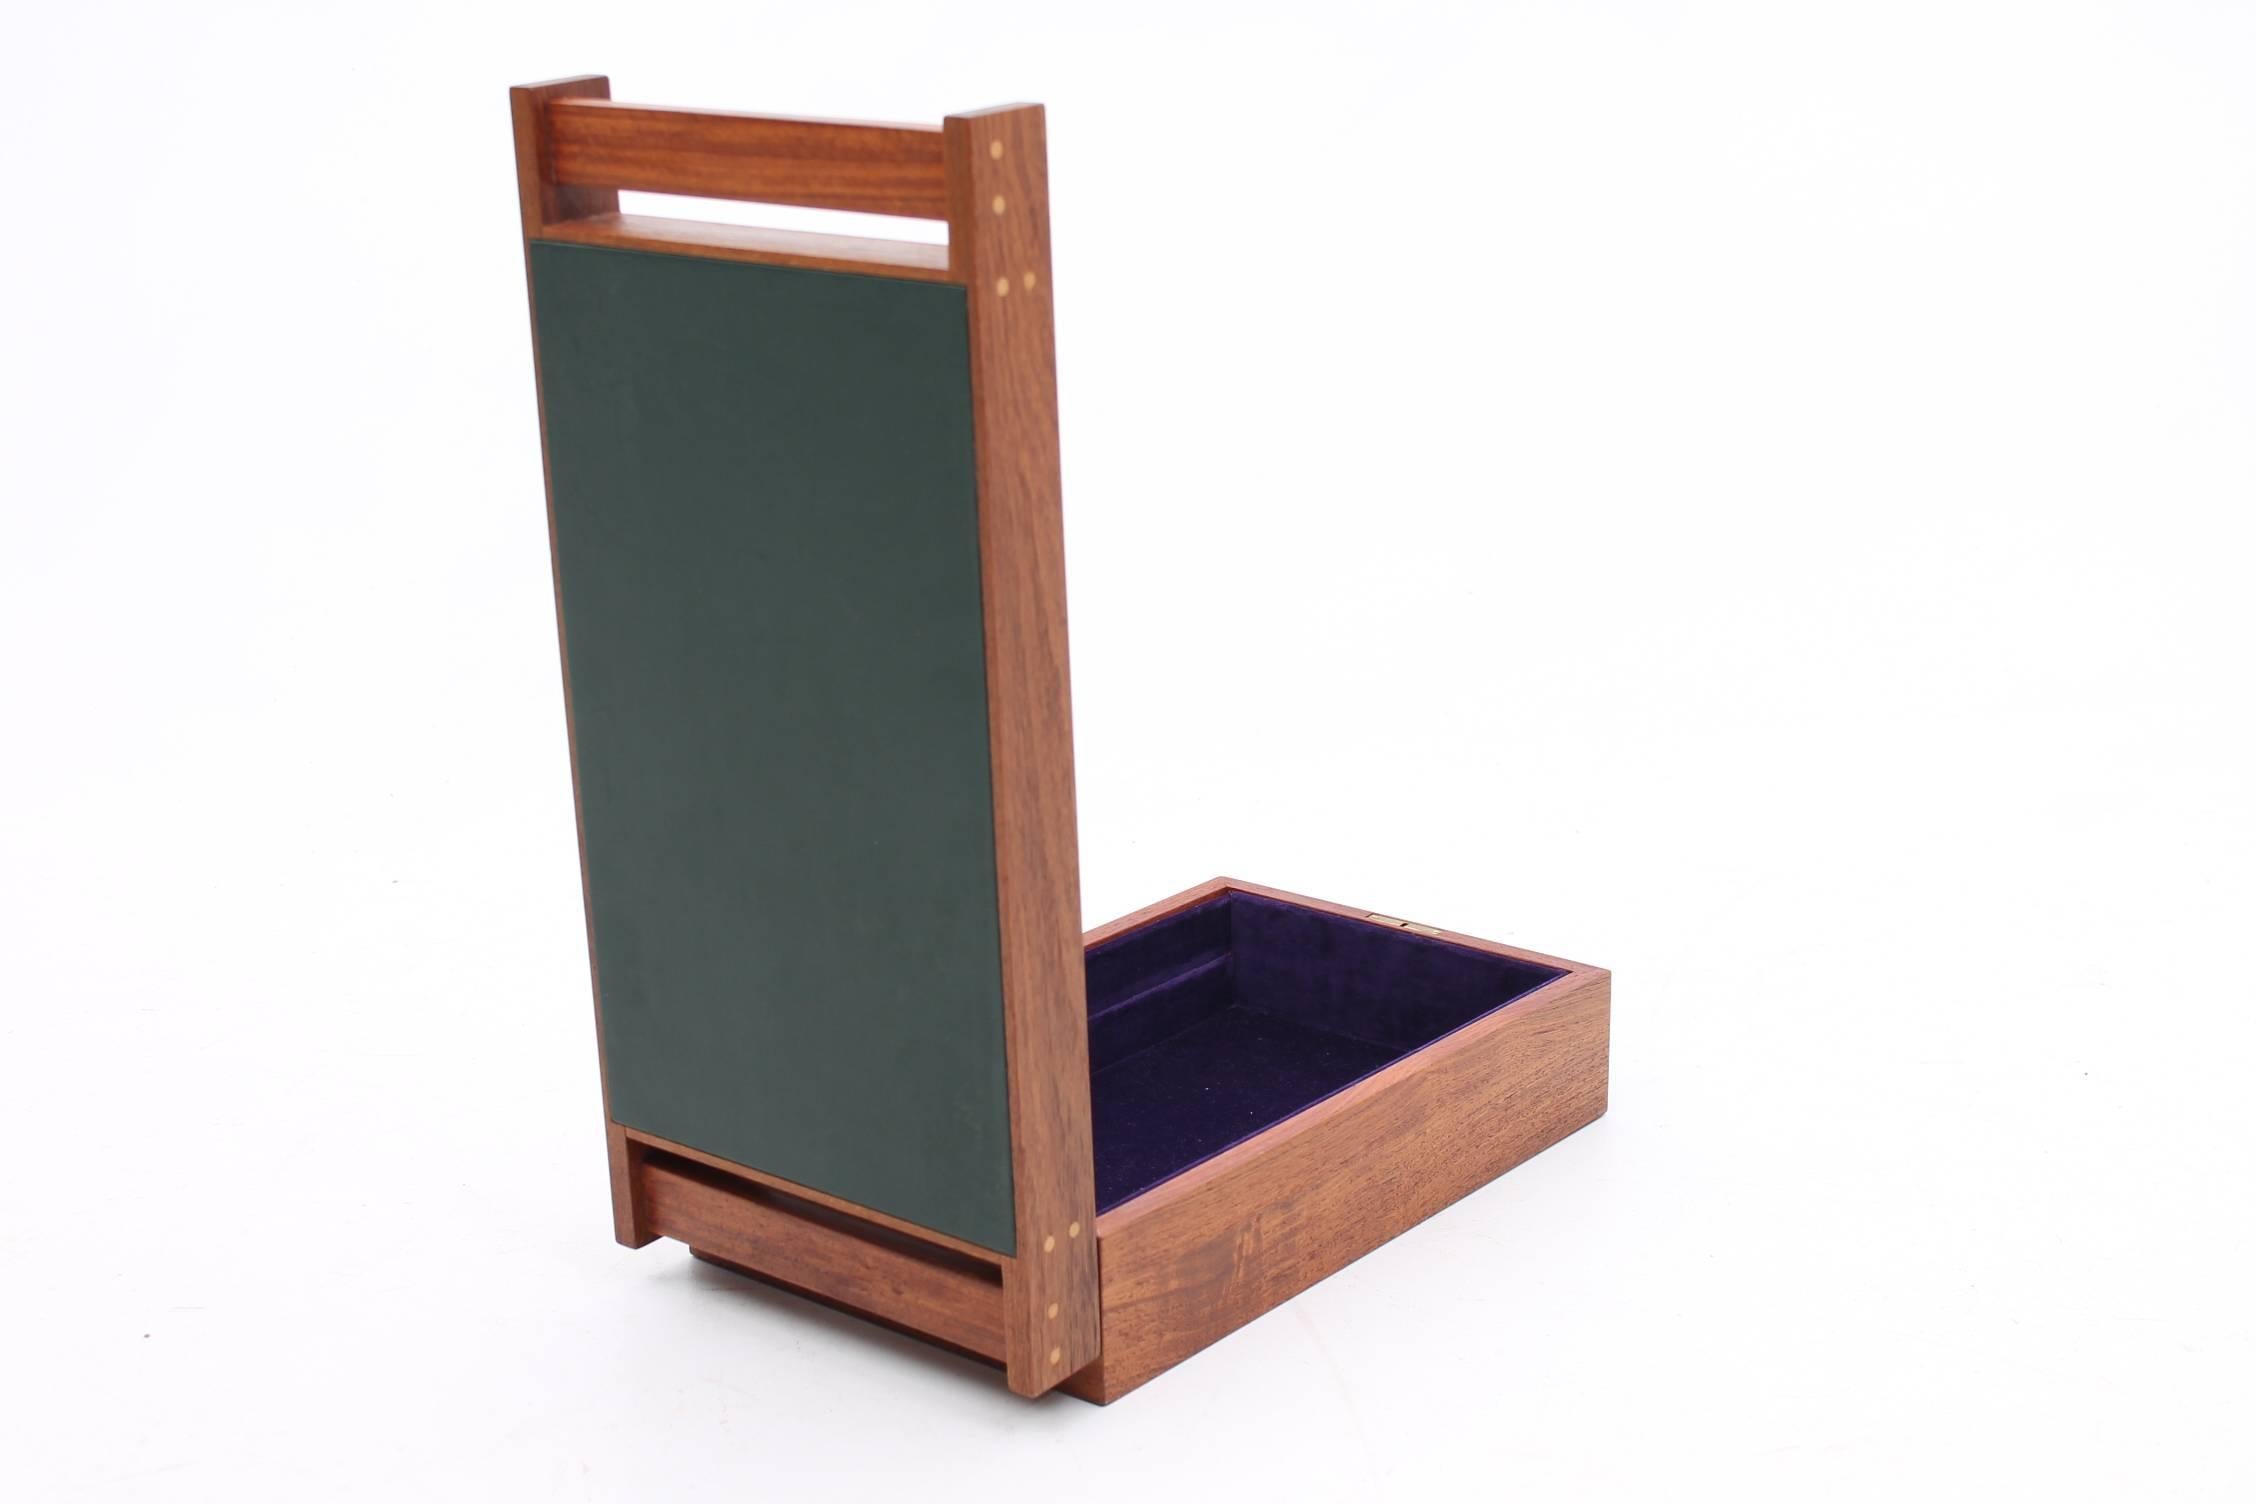 Stunning and unique jewelry box designed by Aksel Kjersgaard and produced by Odder Furniture. The gorgeous rectangular box has teakwood with black leather on the top. The interior of the box has a mirror and velvet lining.